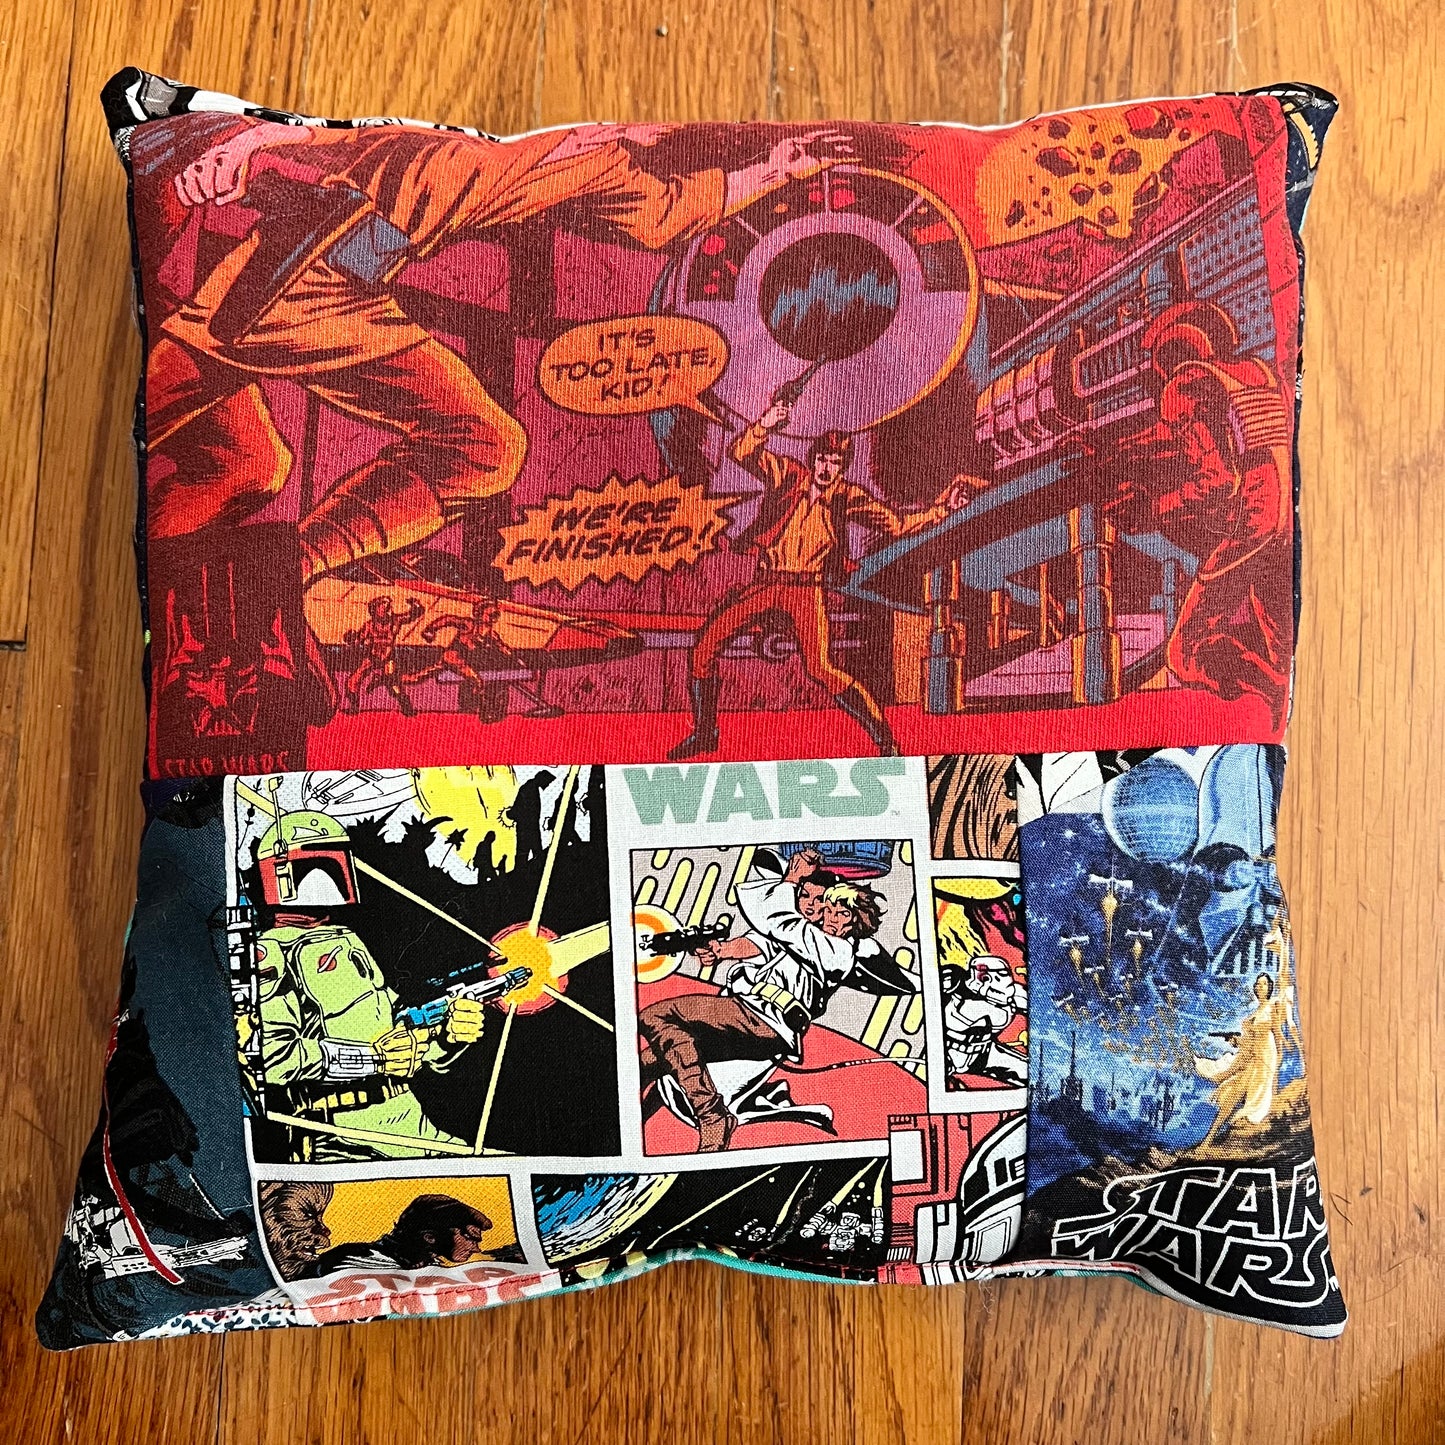 A little accent pillow with Star Wars comic book print on a red tshirt, and various star wars comic scenes below